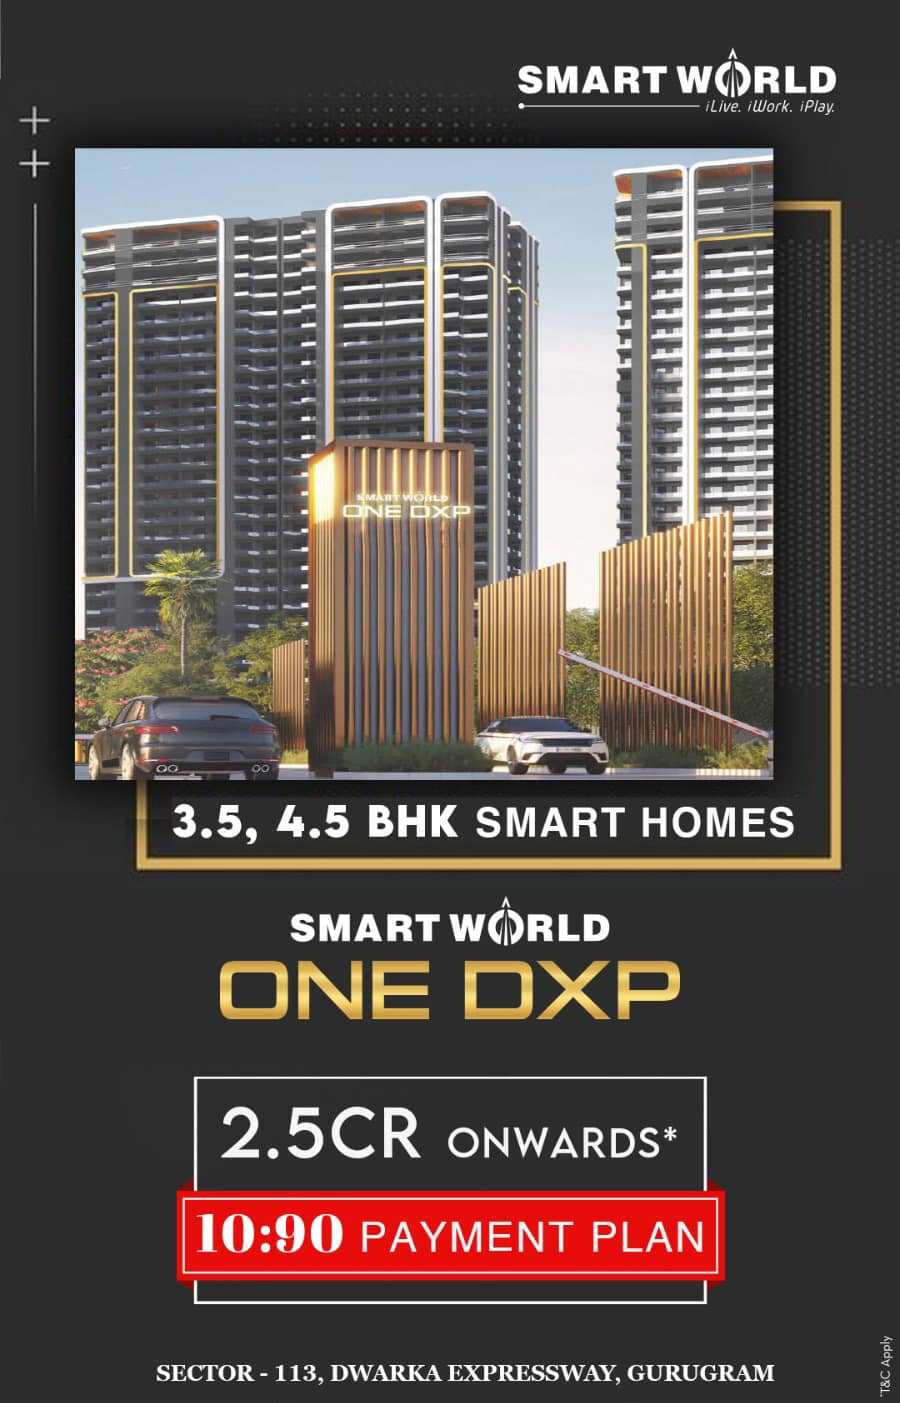 Presenting  10:90 payment plan at Smart World One DXP in Sector 113, Gurgaon